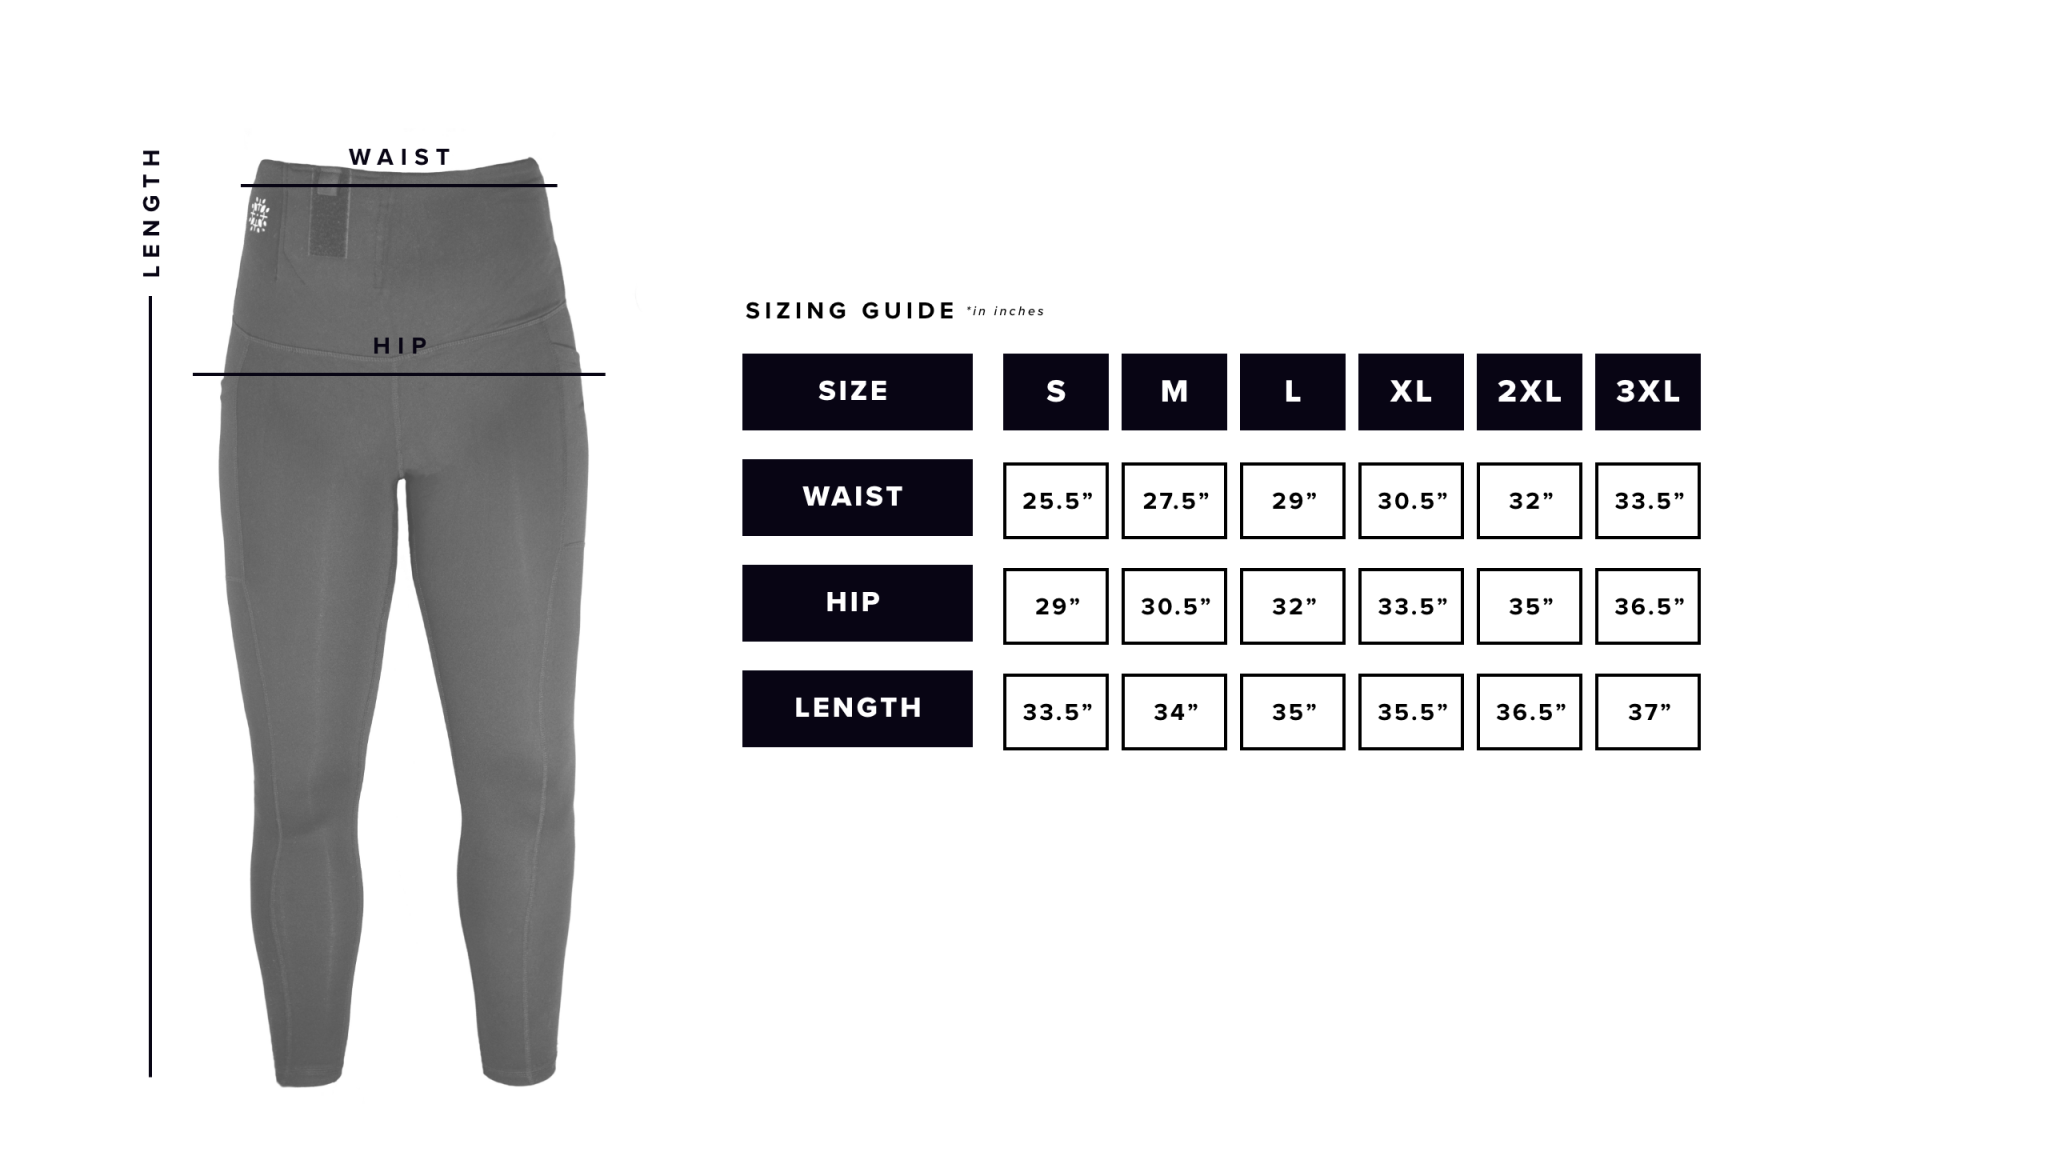 Women's Concealed Carry Leggings